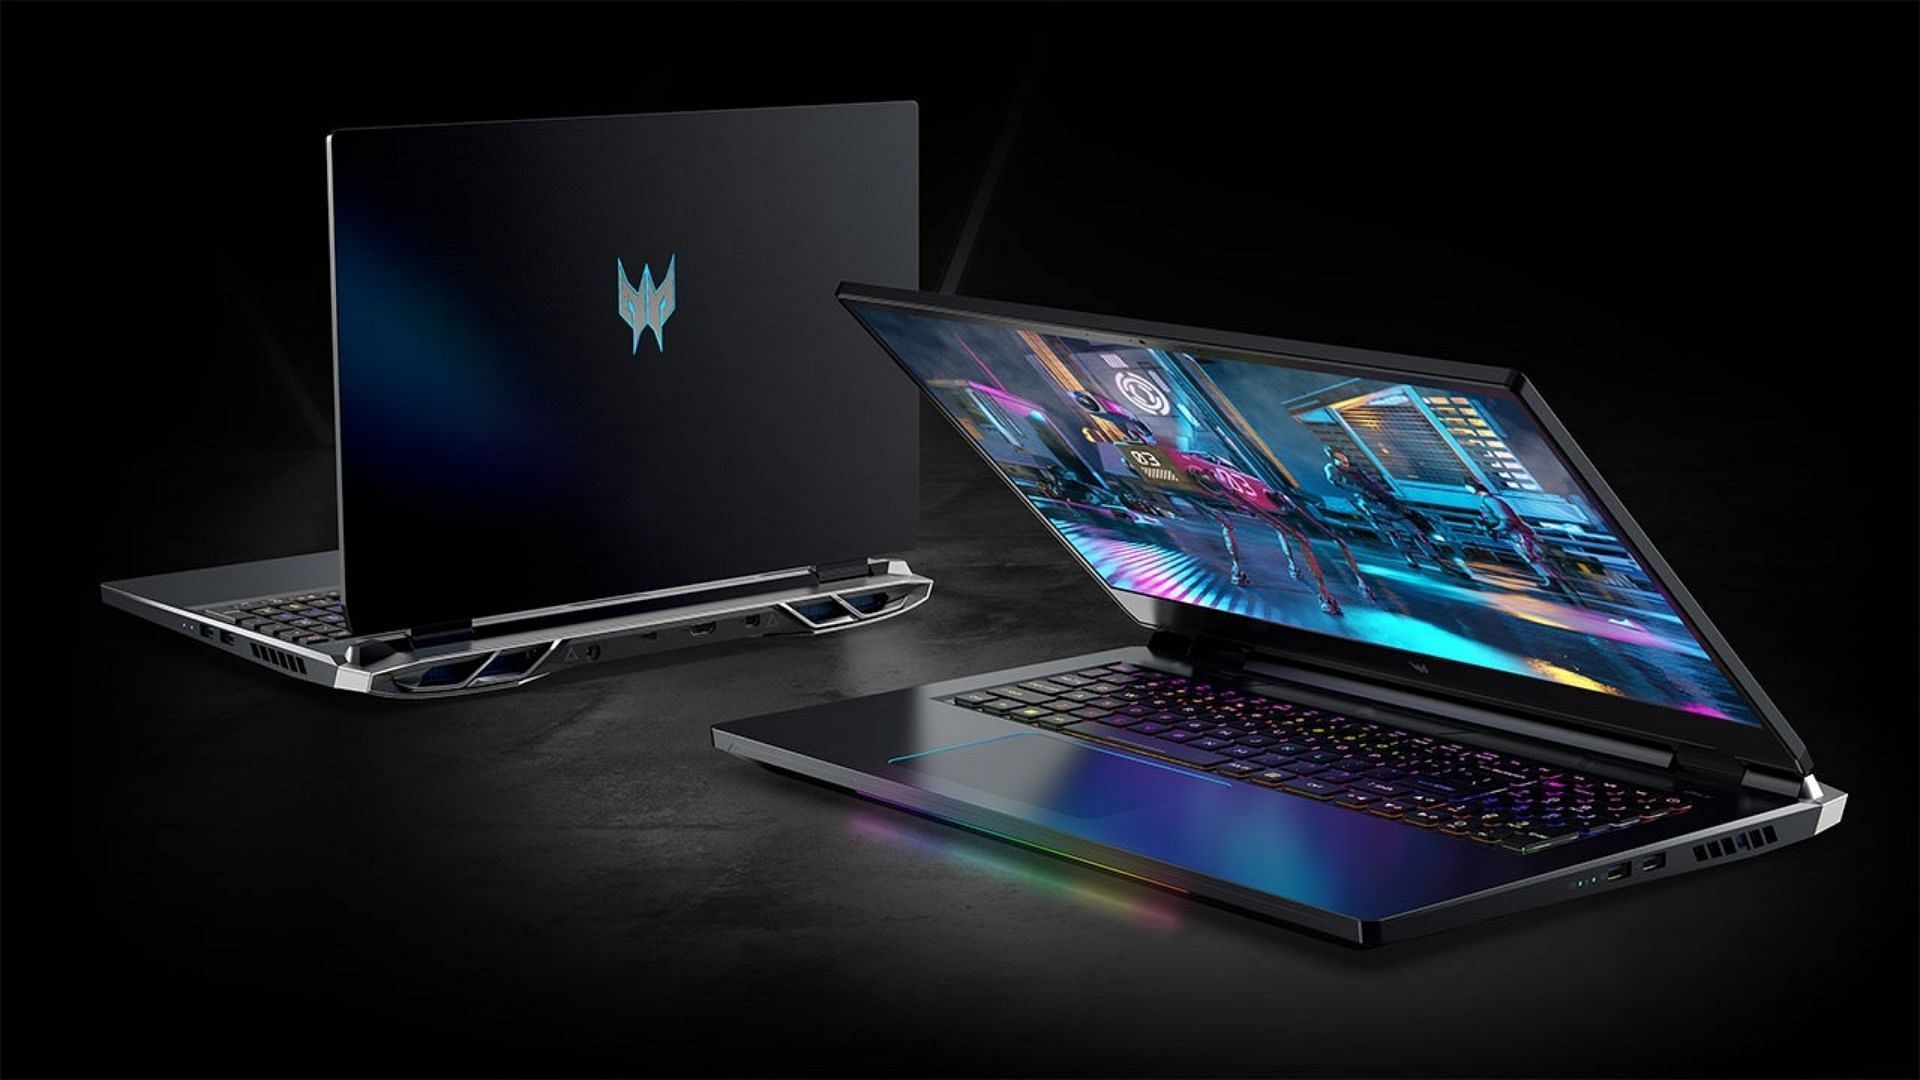 Multiple gaming laptops are on sale this week (Image via Acer)